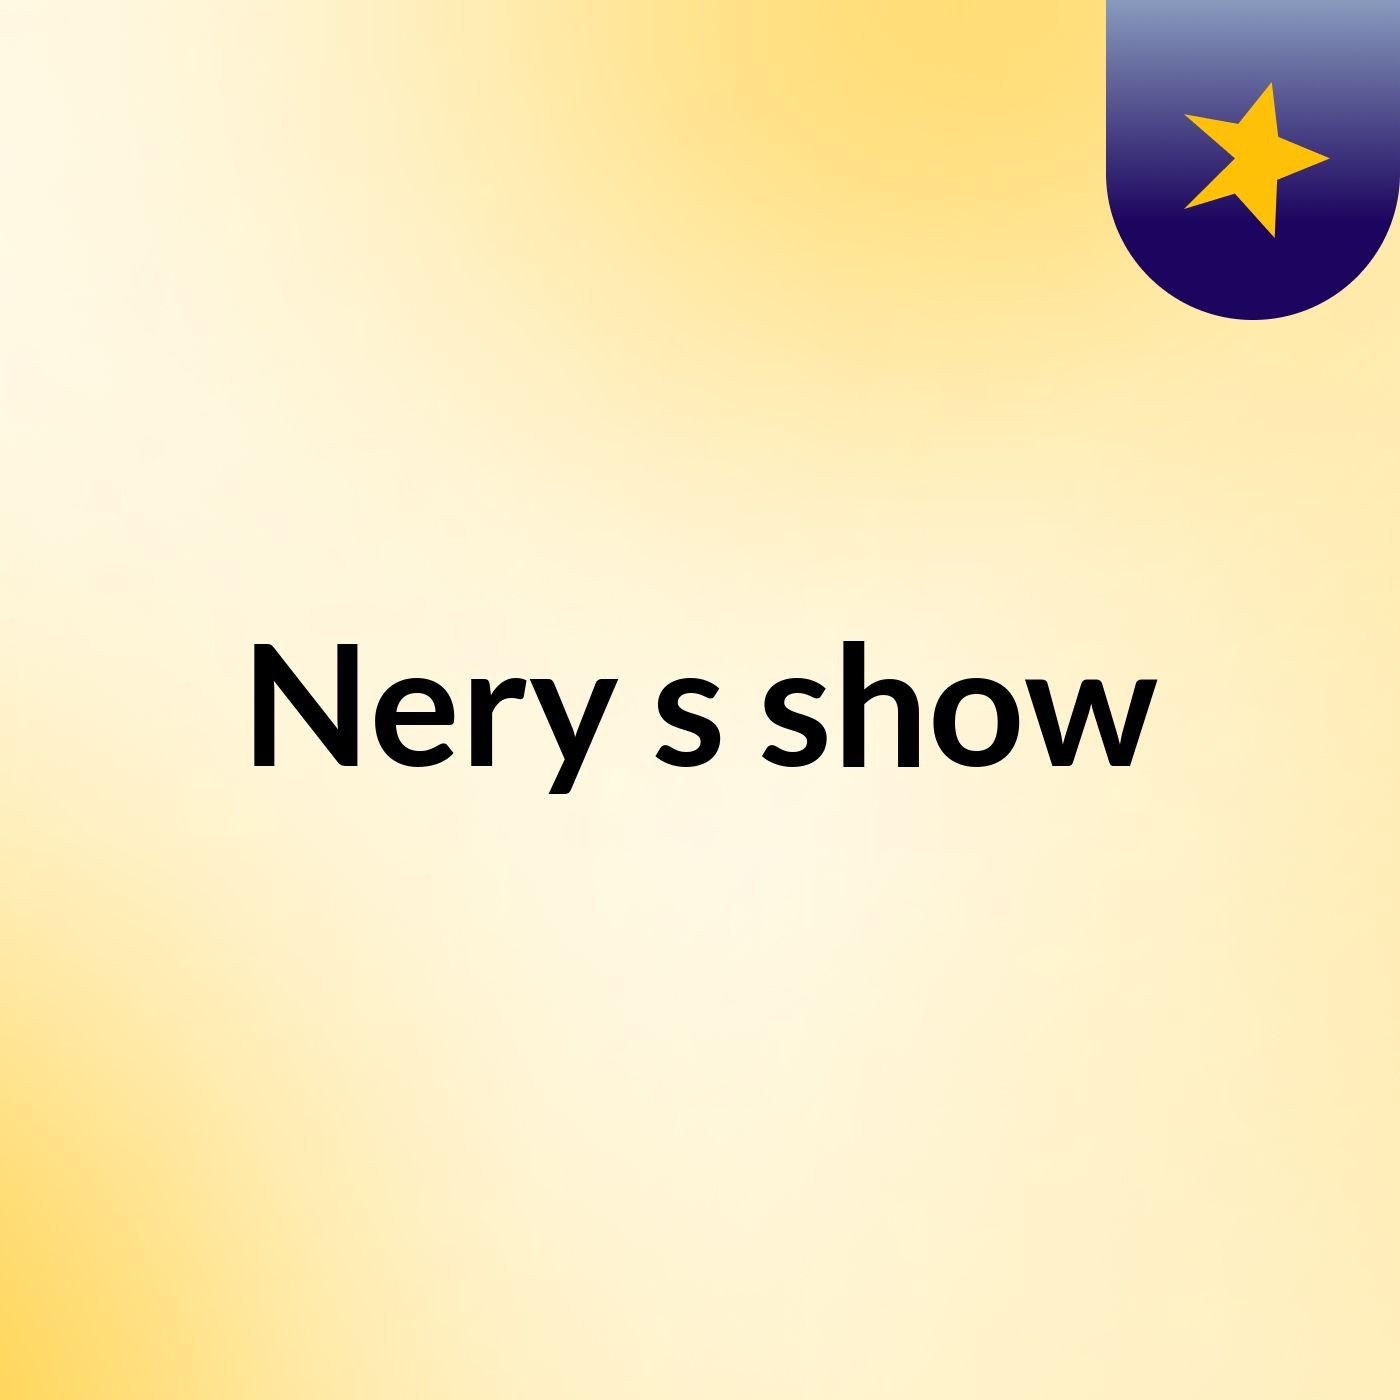 Nery's show